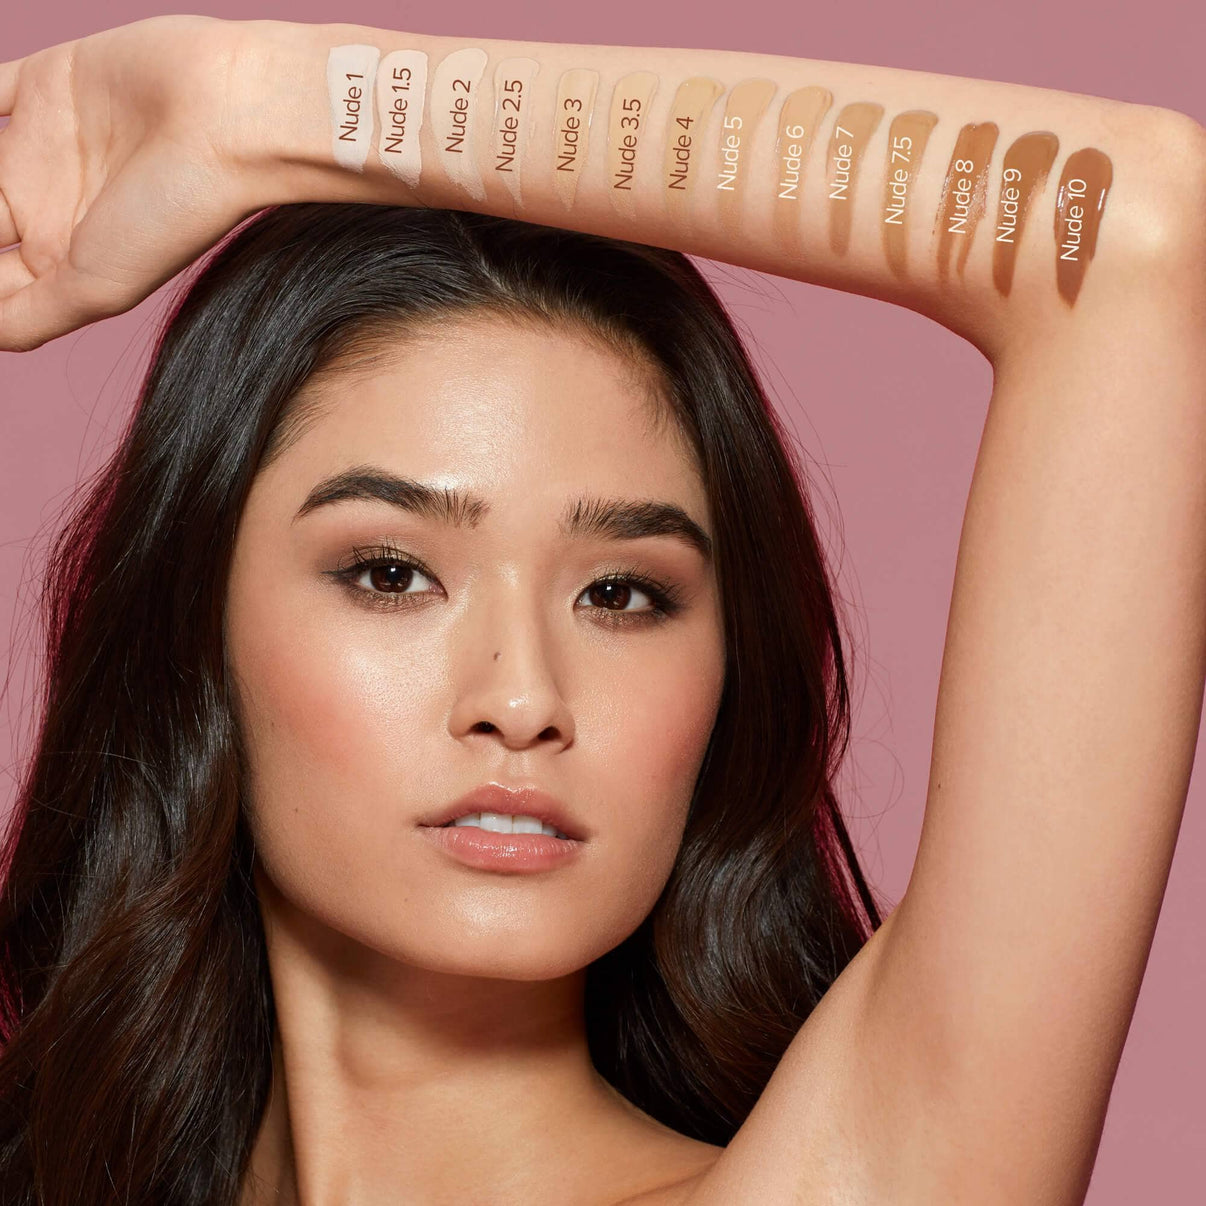 Mixed race model with Nude 1.5 swatch in her arm